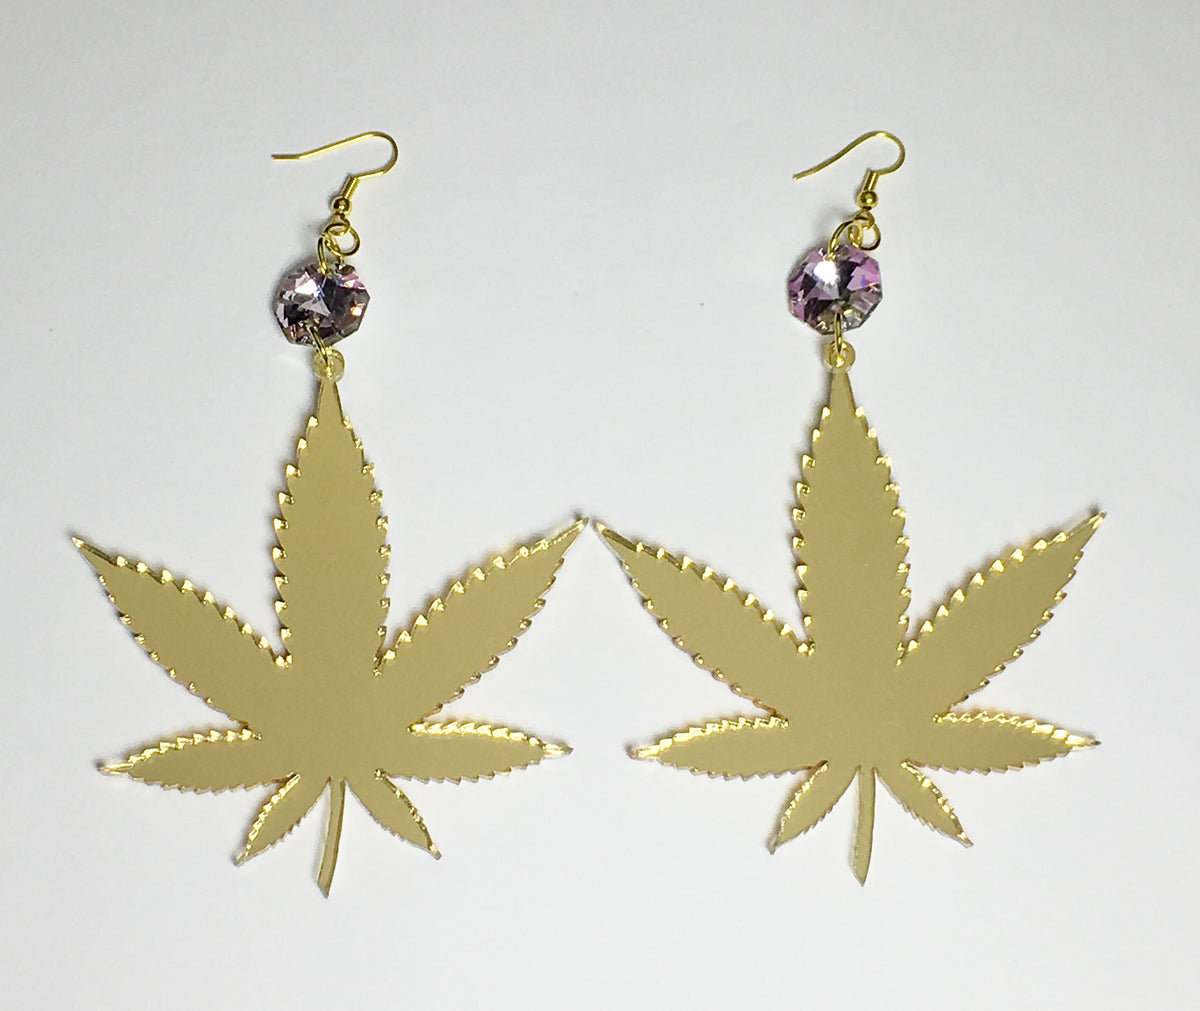 TRIXY STARR - Irie Weed earrings, Gold - The Giant Peach